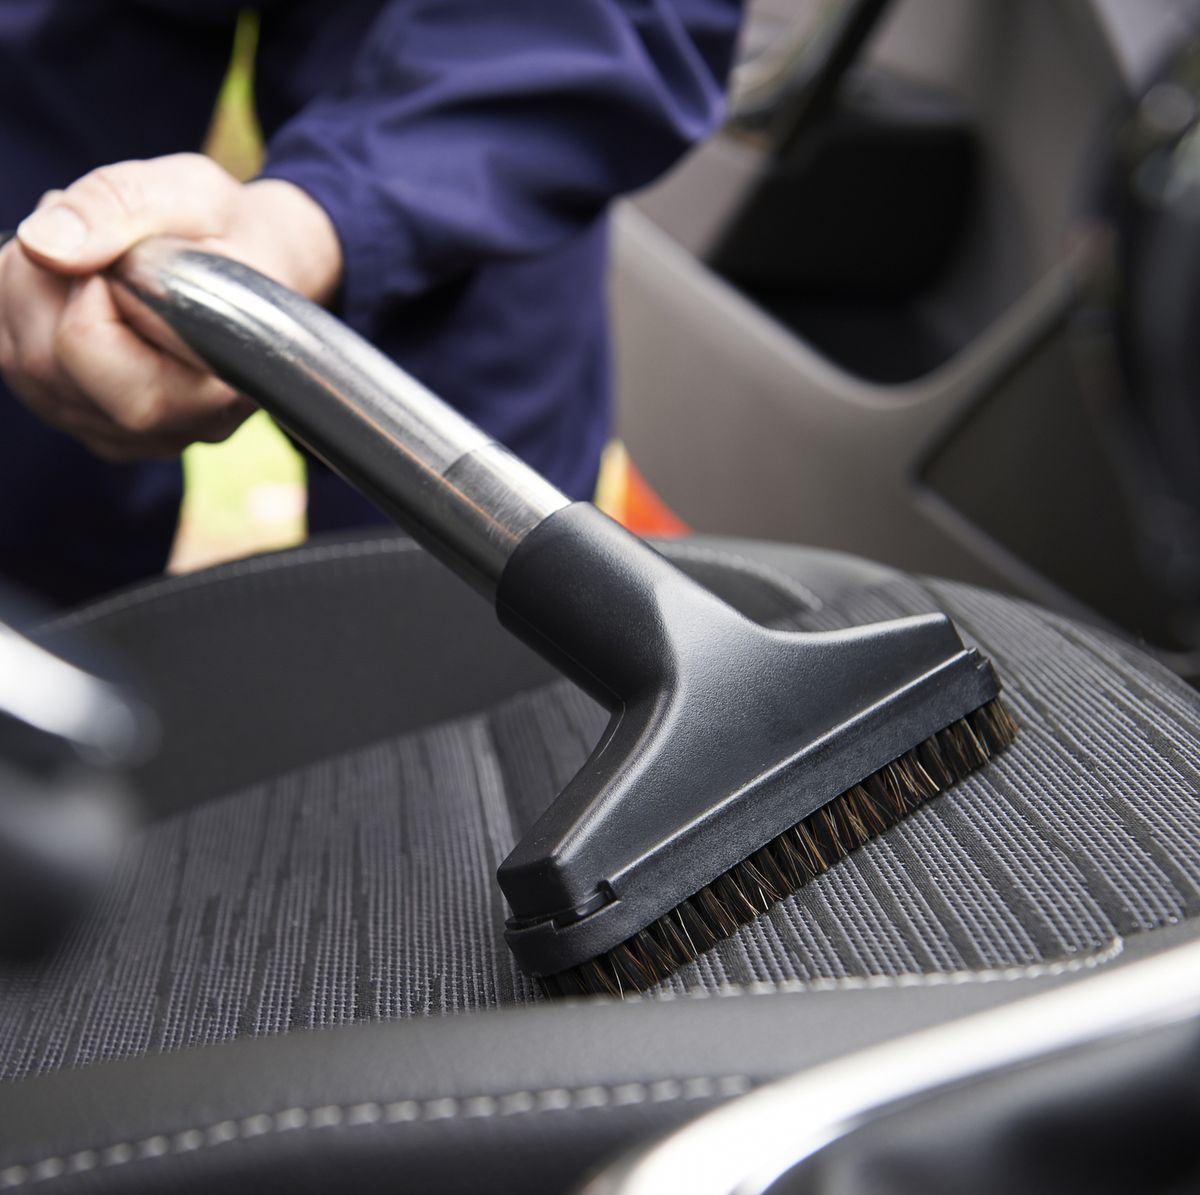 How To Clean A Carpet In A Vehicle